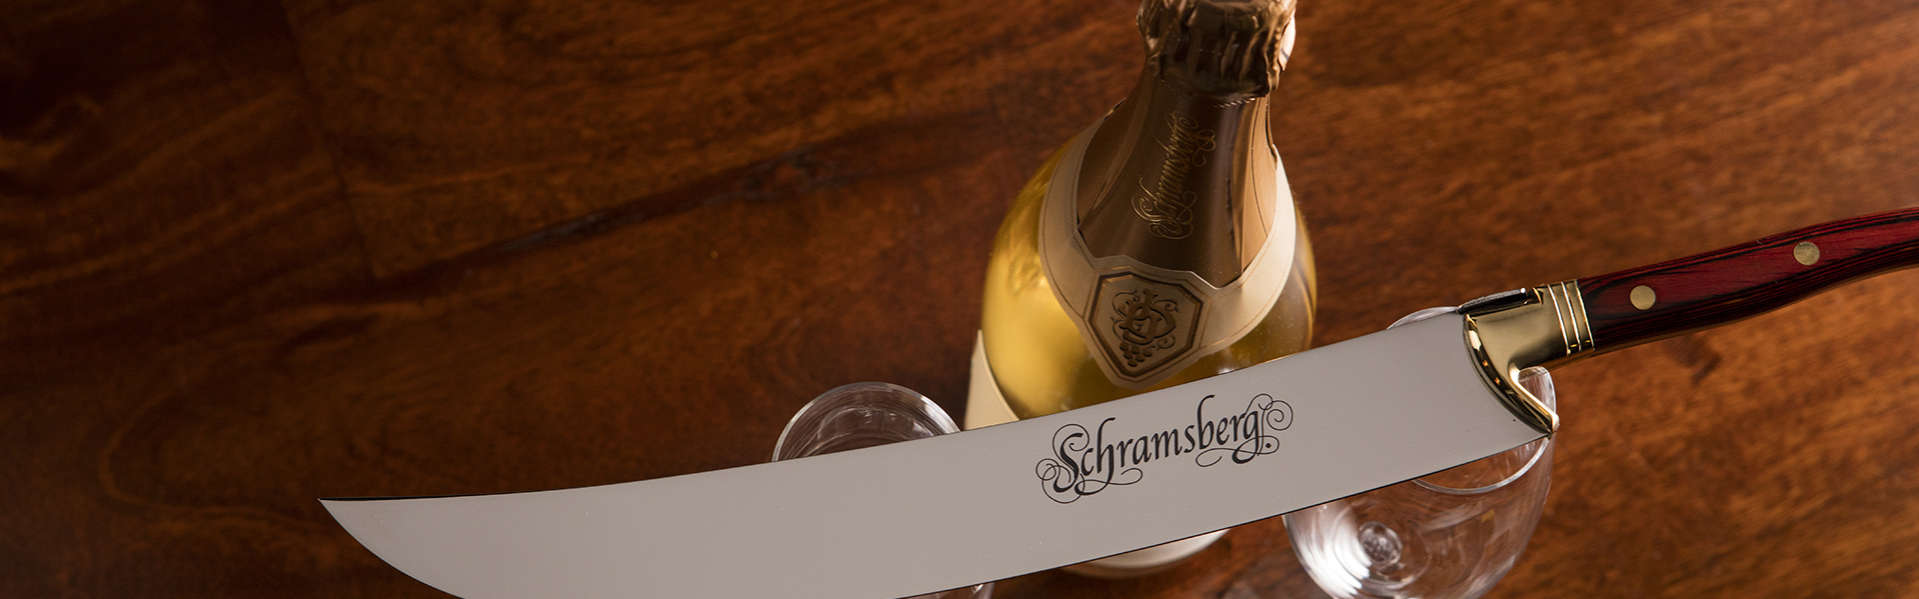 Corporate Gift Set. An overhead shot of a bottle and two glasses. On top of the glasses lays a Schramsberg logo saber